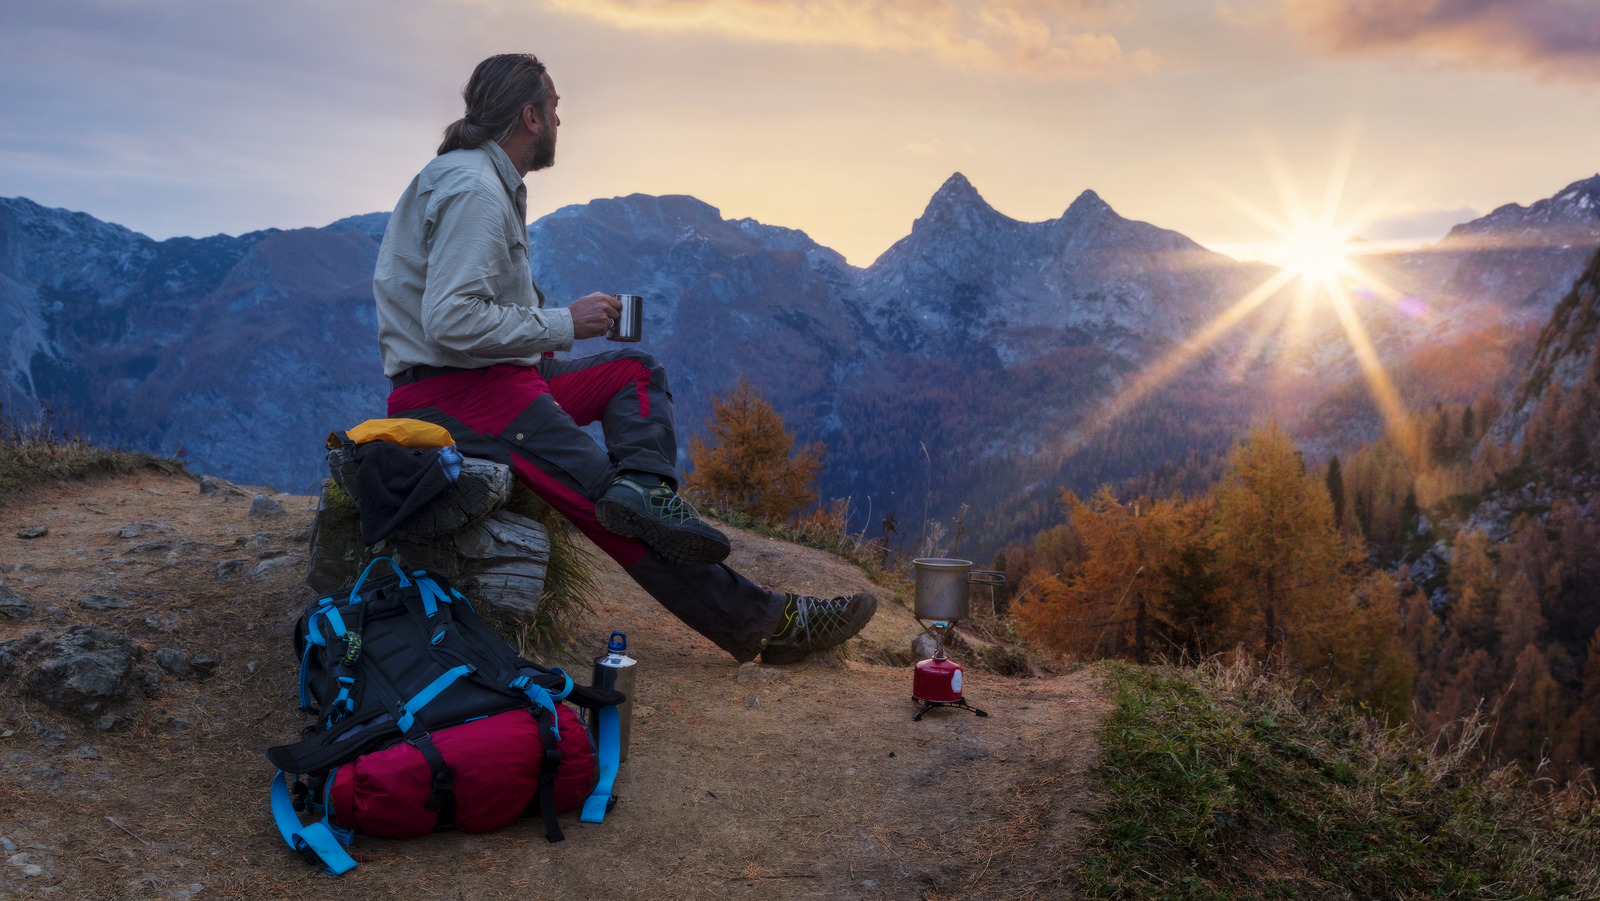 Intro into Backpacking: how to prepare for a backpacking trip